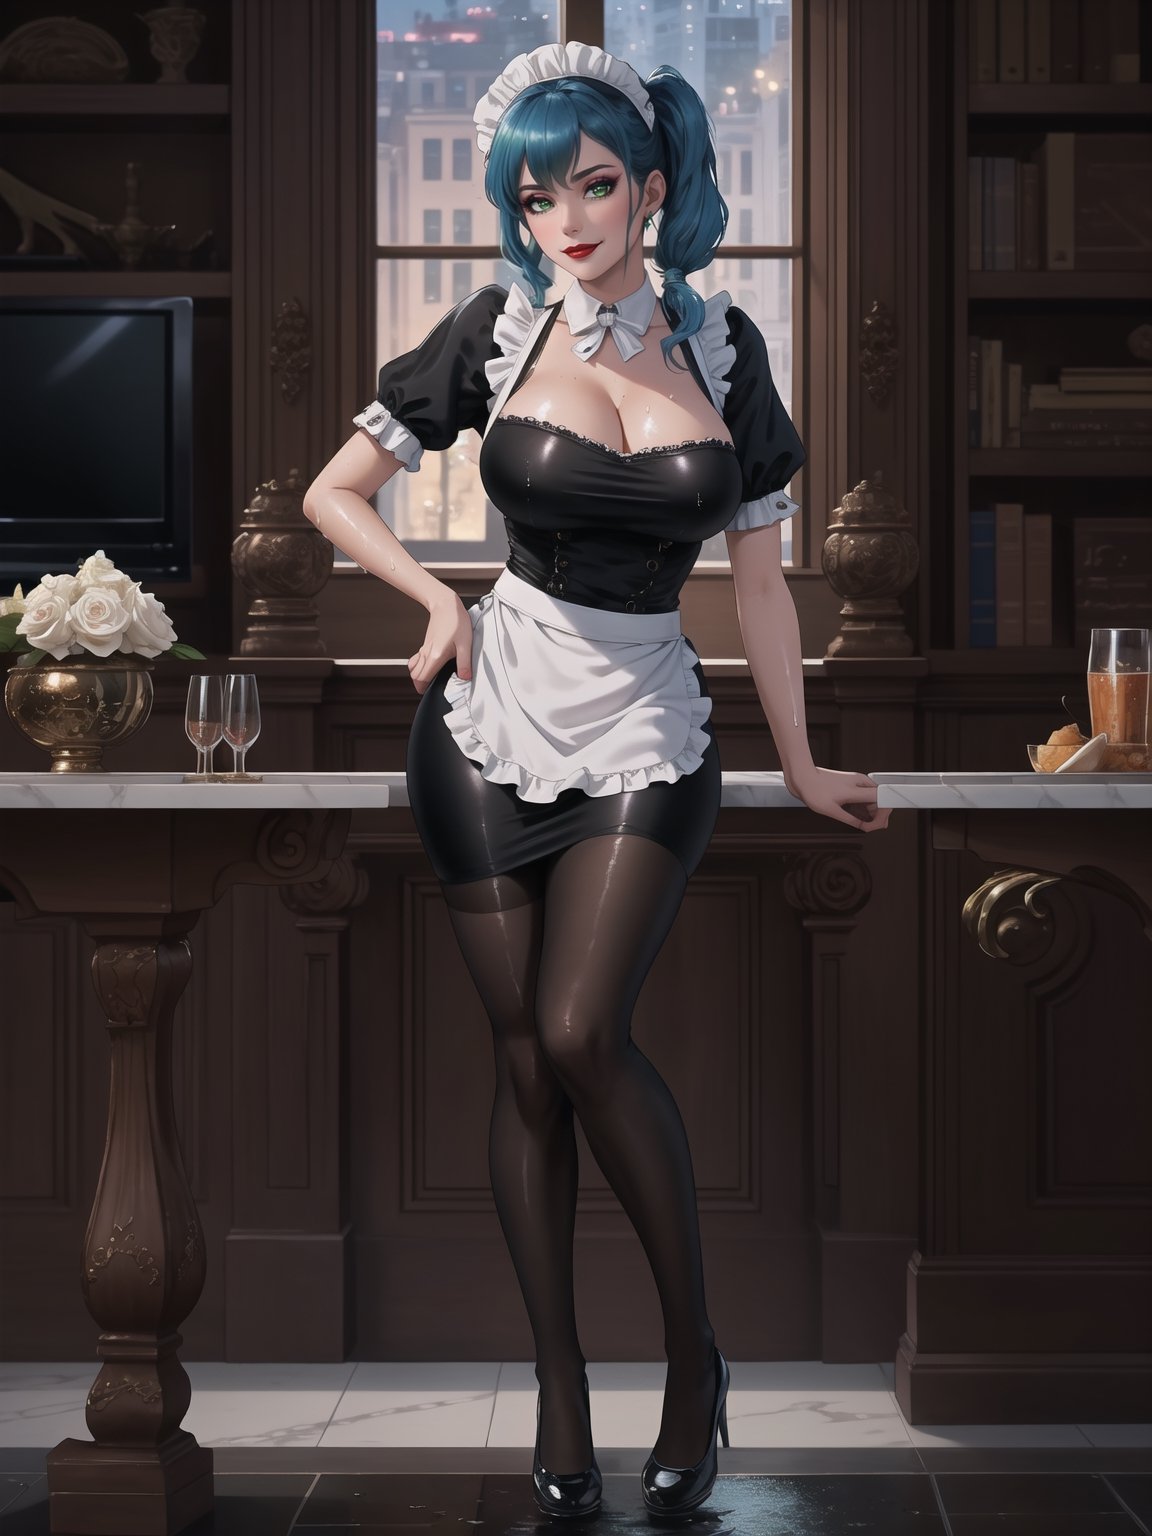 High resolution in 4K, inspired by urban surrealism with touches of classic elegance. | The housekeeper, a beautiful 30-year-old woman, works boldly and sensually. Dressed in a black maid outfit with a white apron, lycra stockings, and black flat shoes, she stares directly at the viewer with her long, blue hair tied in two pigtails with metallic clips, adding a playful touch to her appearance. Her entire body and clothing are wet from water, giving a bold look to the scene. | The setting is in a large and luxurious apartment, filled with elegant furniture and marble structures. A glass dining table, a bookshelf with a 90-inch television, and a window overlooking the rainy city at night make up the scene. The housekeeper, with a bold attitude, interacts with imposing structures, leaning on them and adopting sensual poses, creating a provocative and unique dynamic. | A 30-year-old housekeeper with a blend of urban surrealism and classic elegance, working boldly and sensually in a luxurious apartment during a rainy night. | She is striking a ((sensual pose while interacting, boldly leaning on a large structure in the scene. Elegantly leaning against, it adds a unique touch to the scene.):1.3), ((Full body image)), perfect hand, fingers, hand, perfect, better_hands, More Detail,